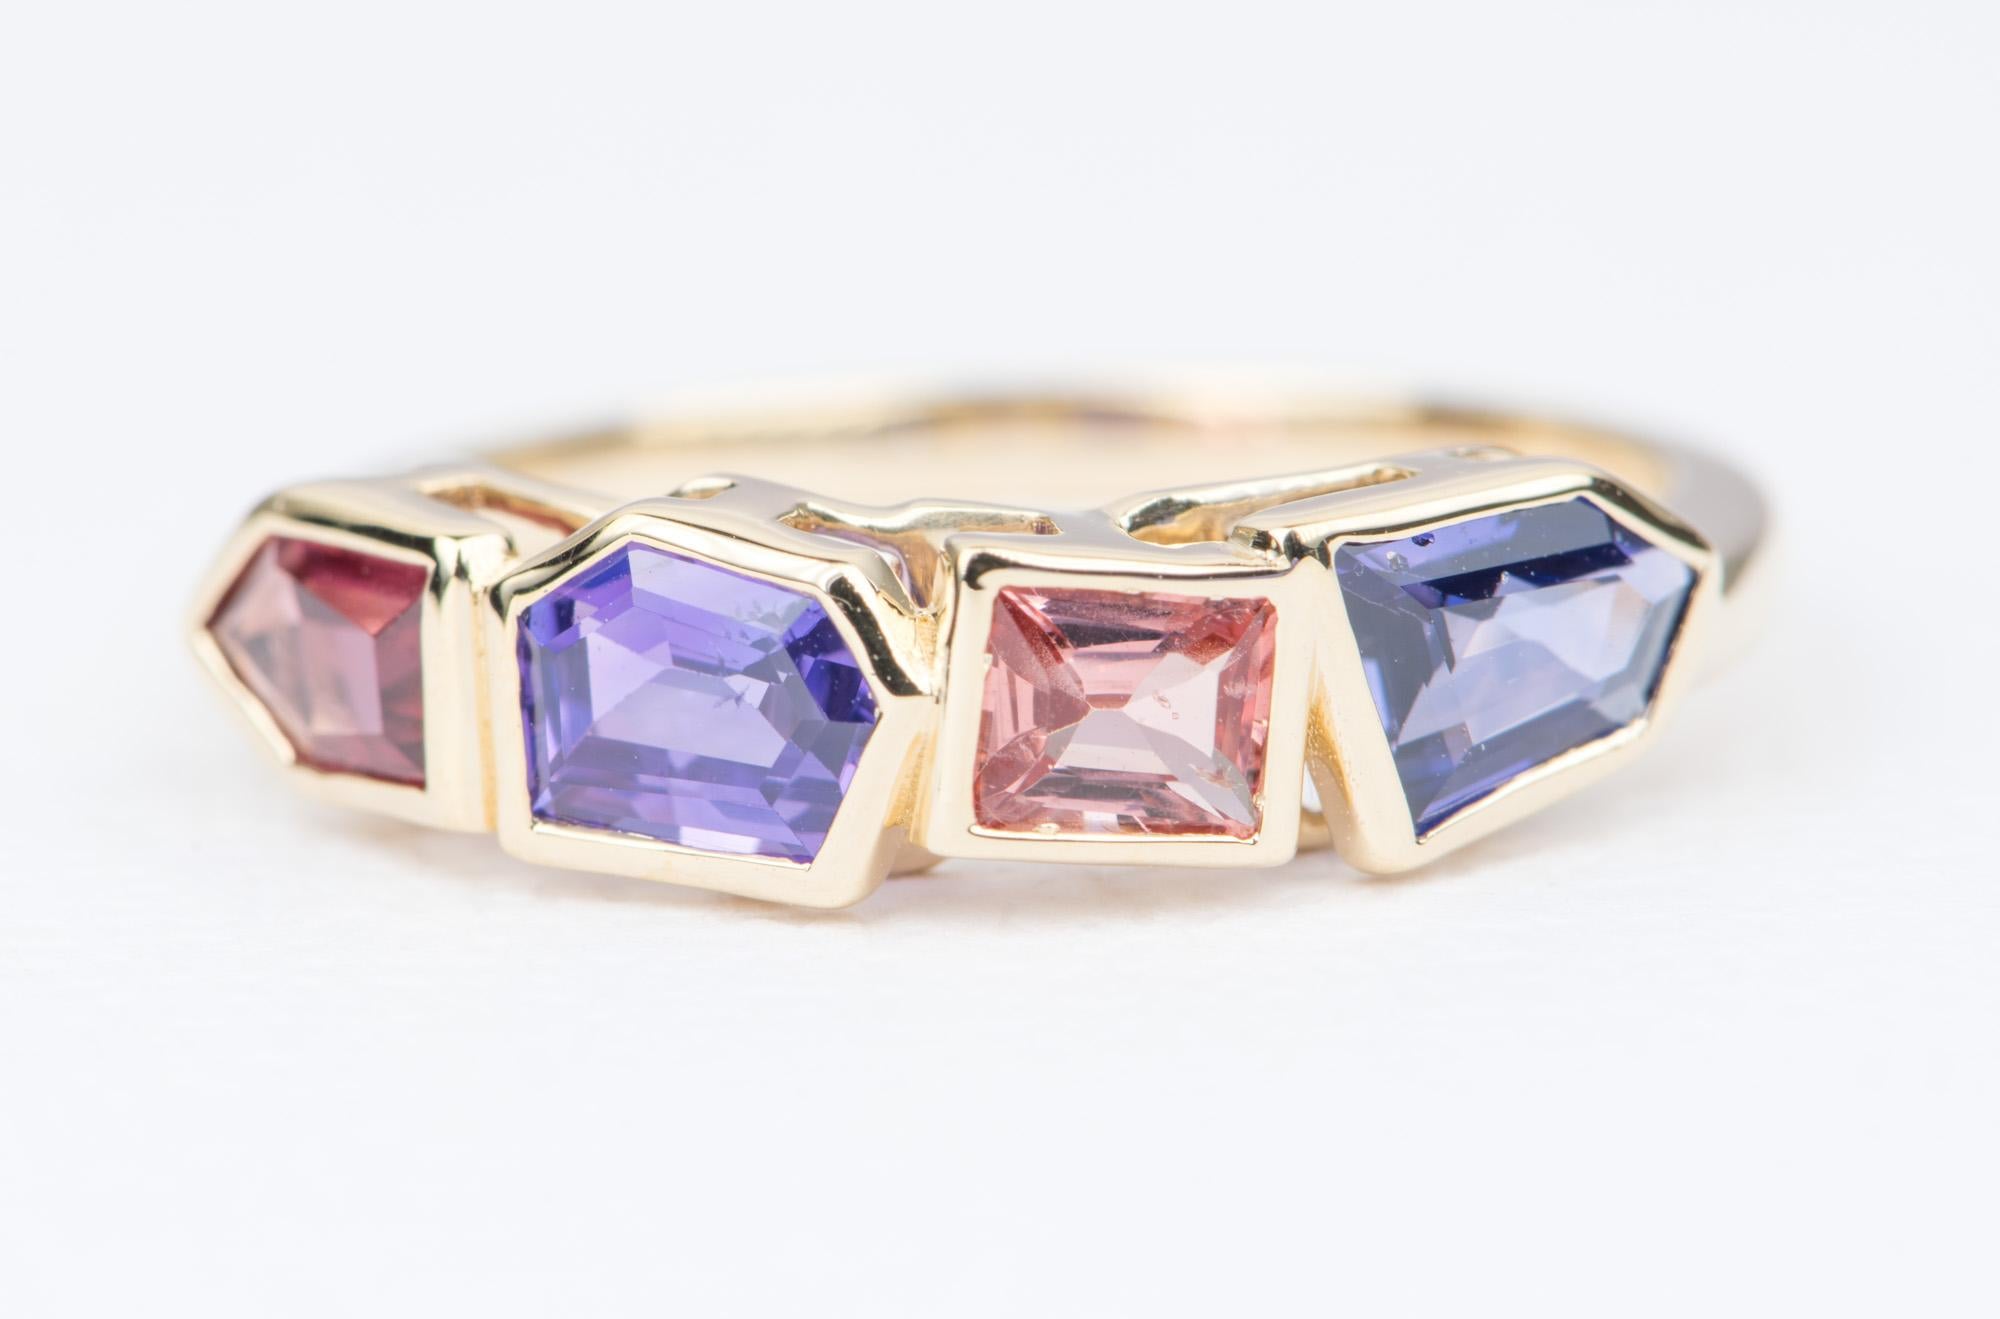 ♥  A solid 14k yellow gold geometric shaped alternating sapphire and spinel bezel set into a unique wedding band
♥  The overall setting measures 20.25mm in width, 5.10mm in length, and sits 3.79mm tall from the finger

♥  Band width: 1.82mm
♥ 